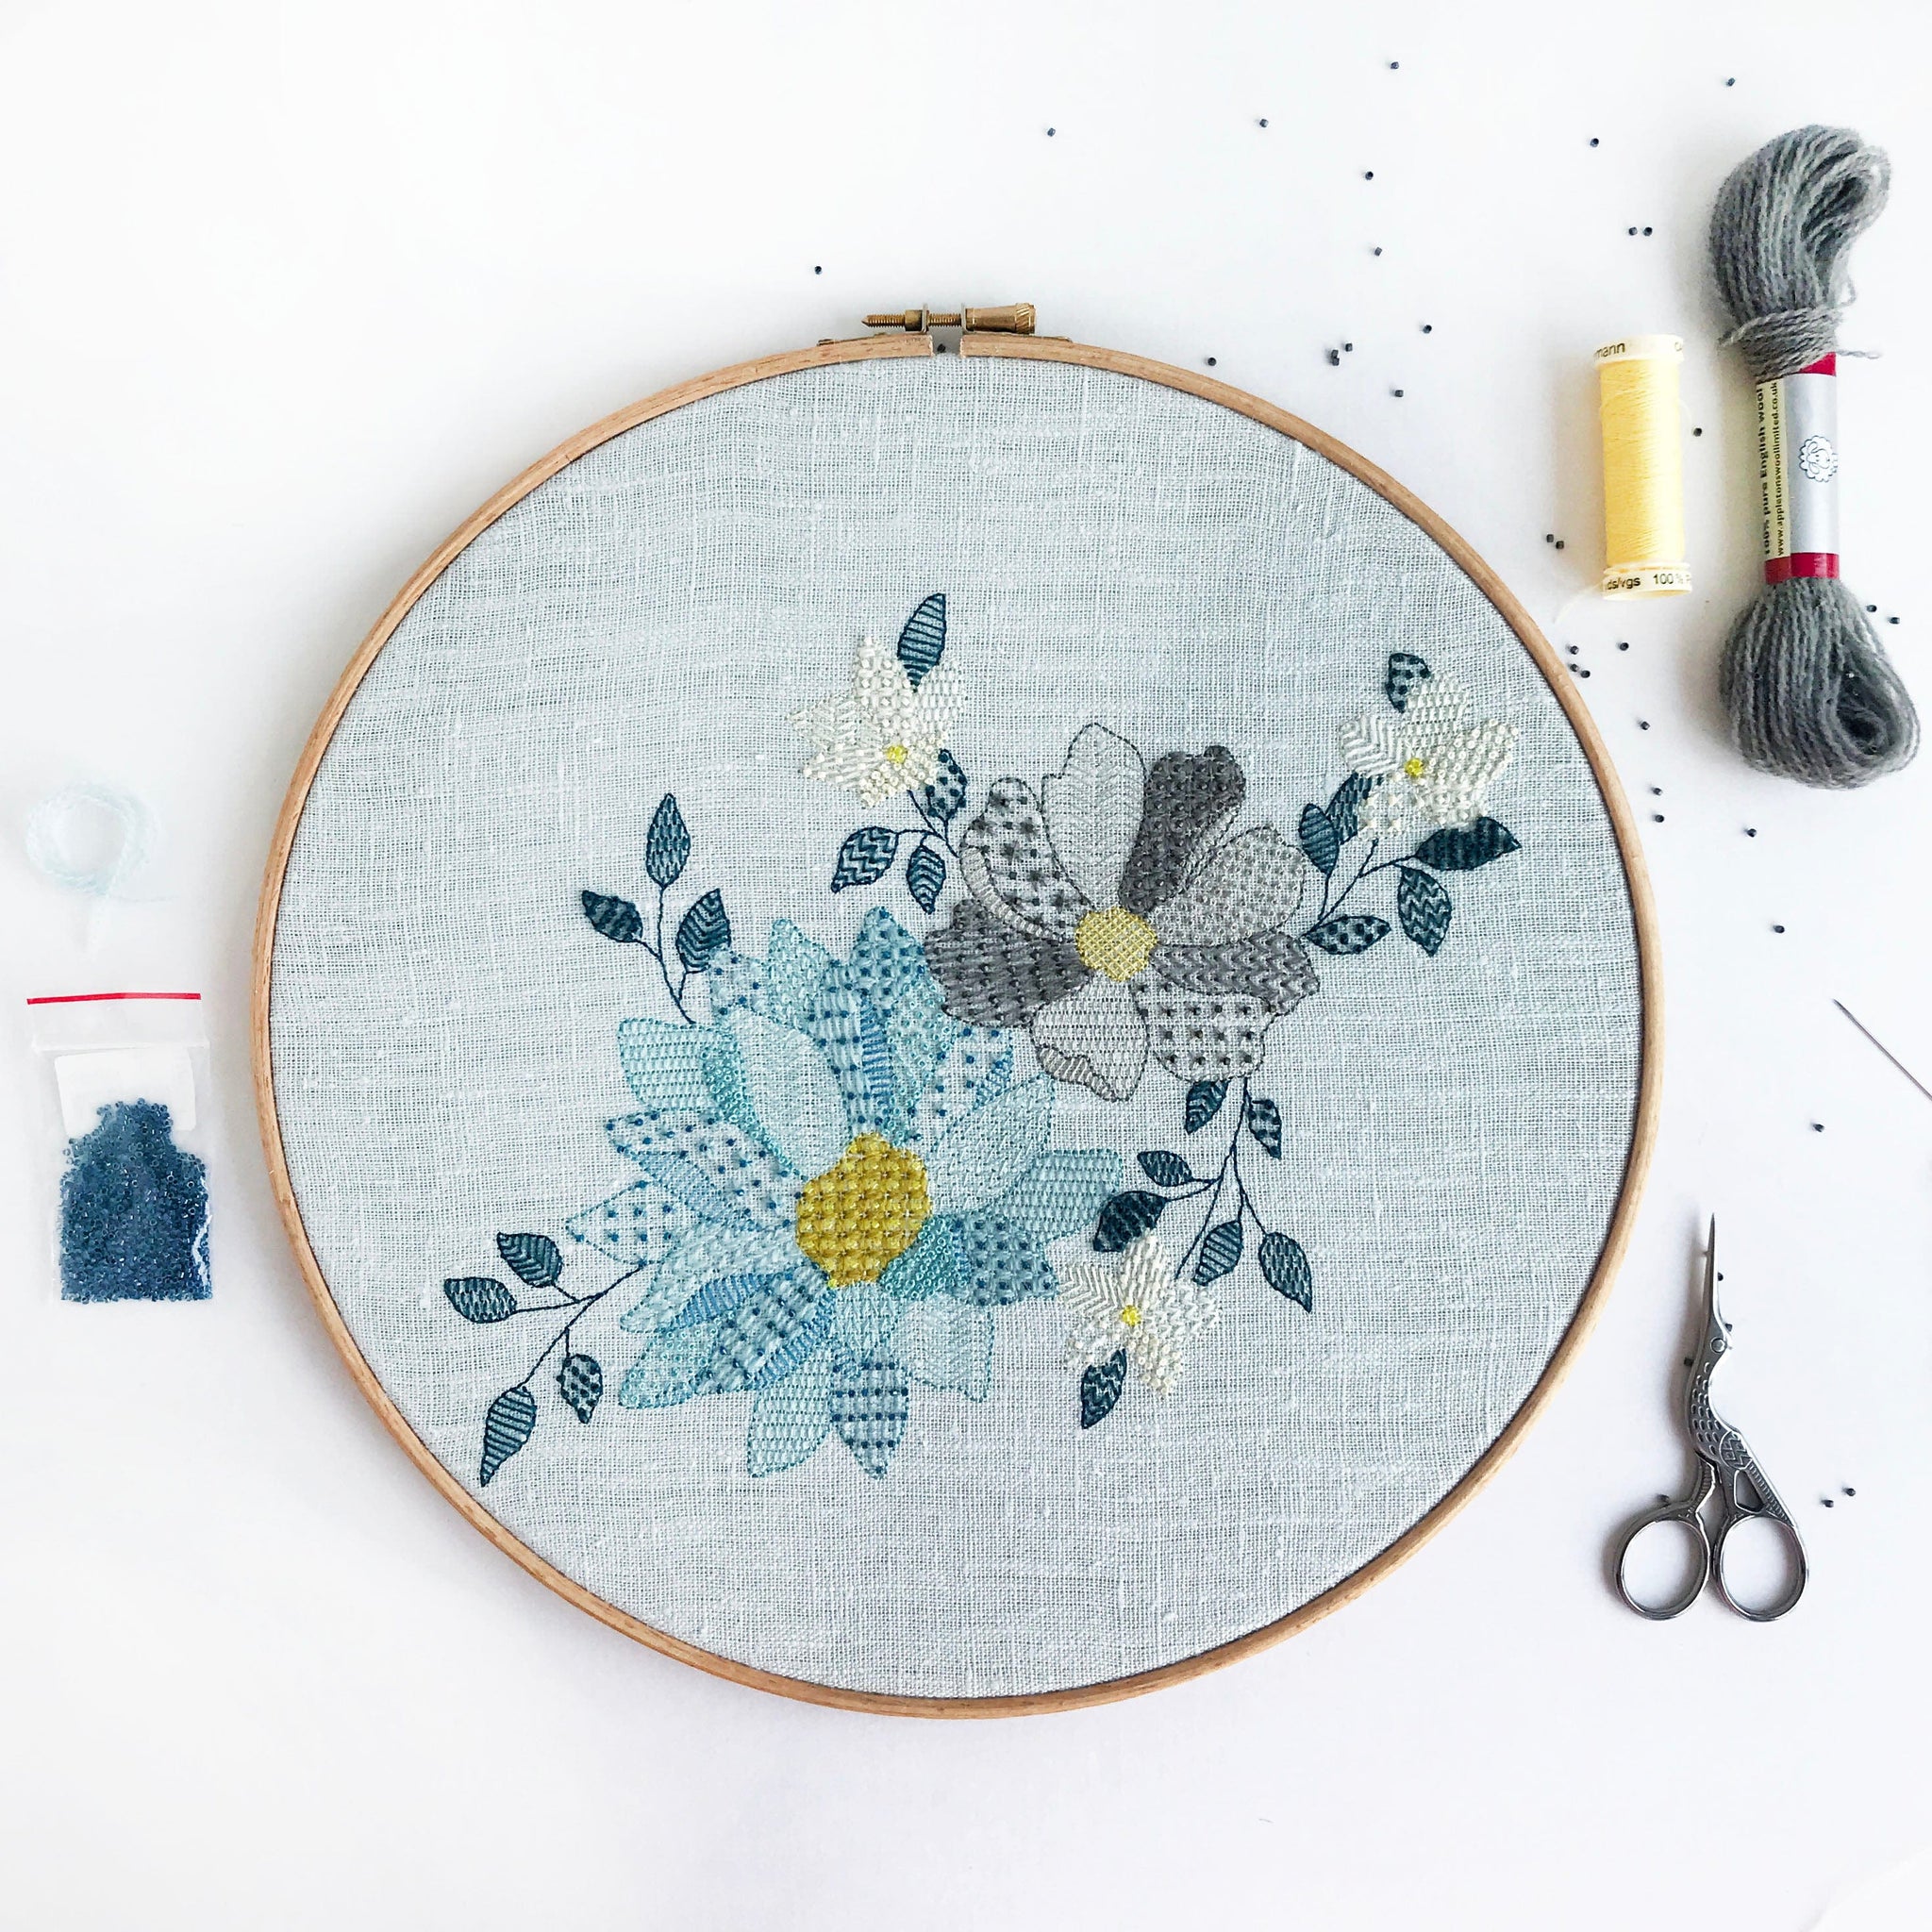 Large Floral Embroidery Kit – Kirsty Freeman Design